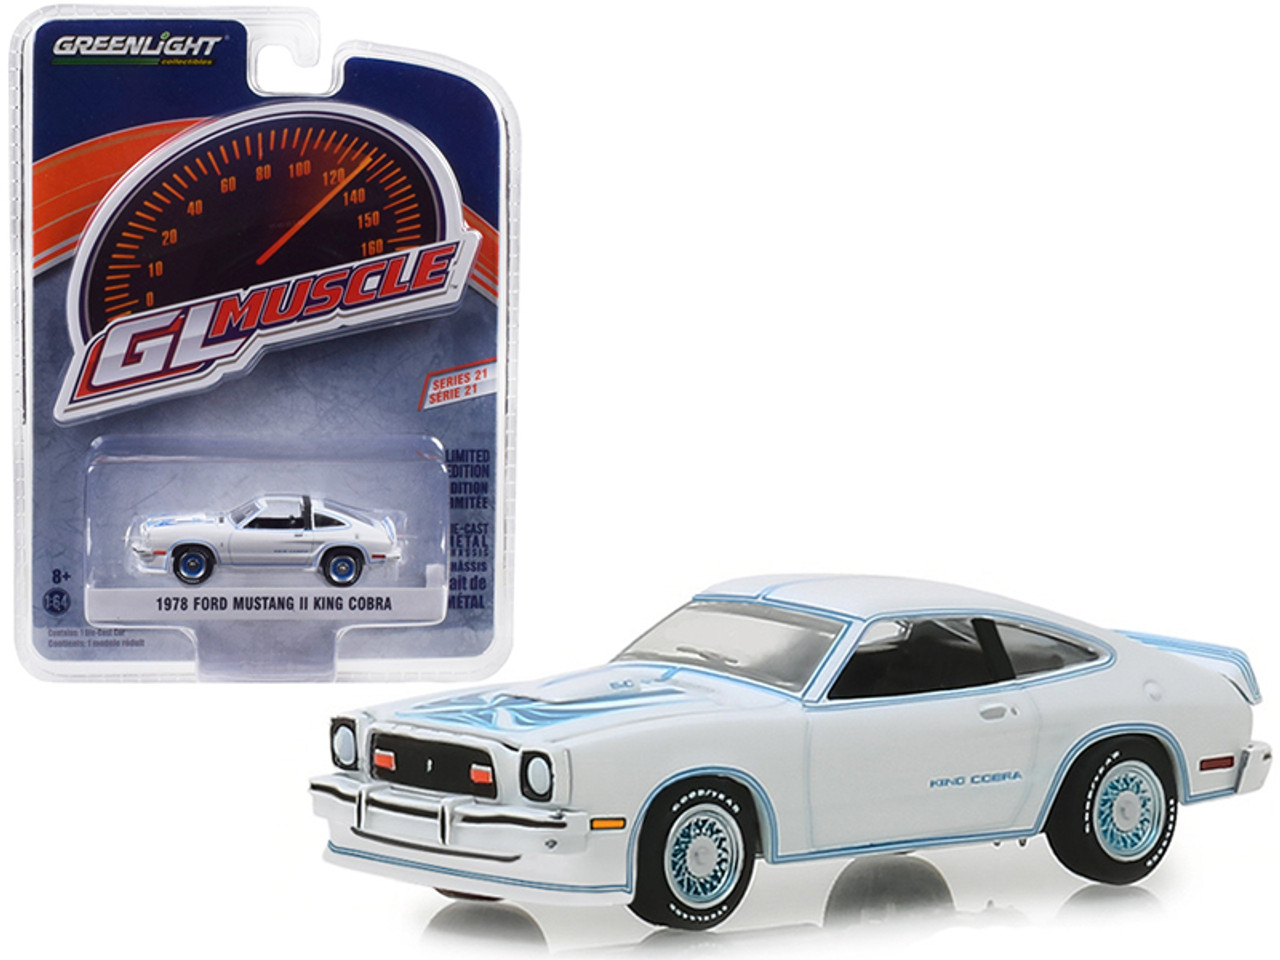 1/64 Greenlight 1978 Ford Mustang II King Cobra White with Blue Stripes "Greenlight Muscle" Series 21 Diecast Car Model